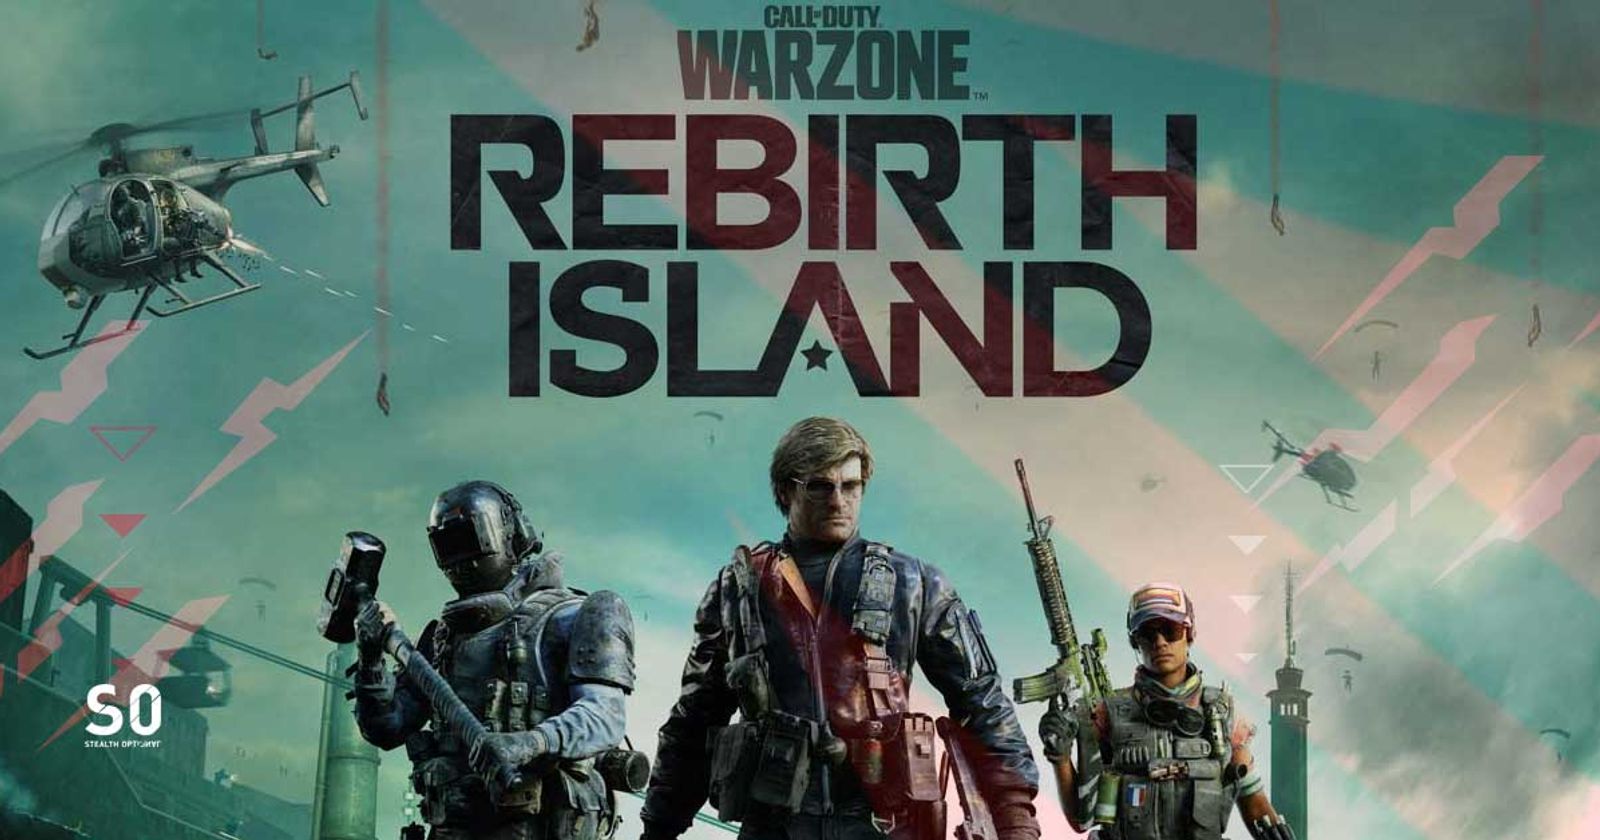 How to play Rebirth Island in Call of Duty Warzone